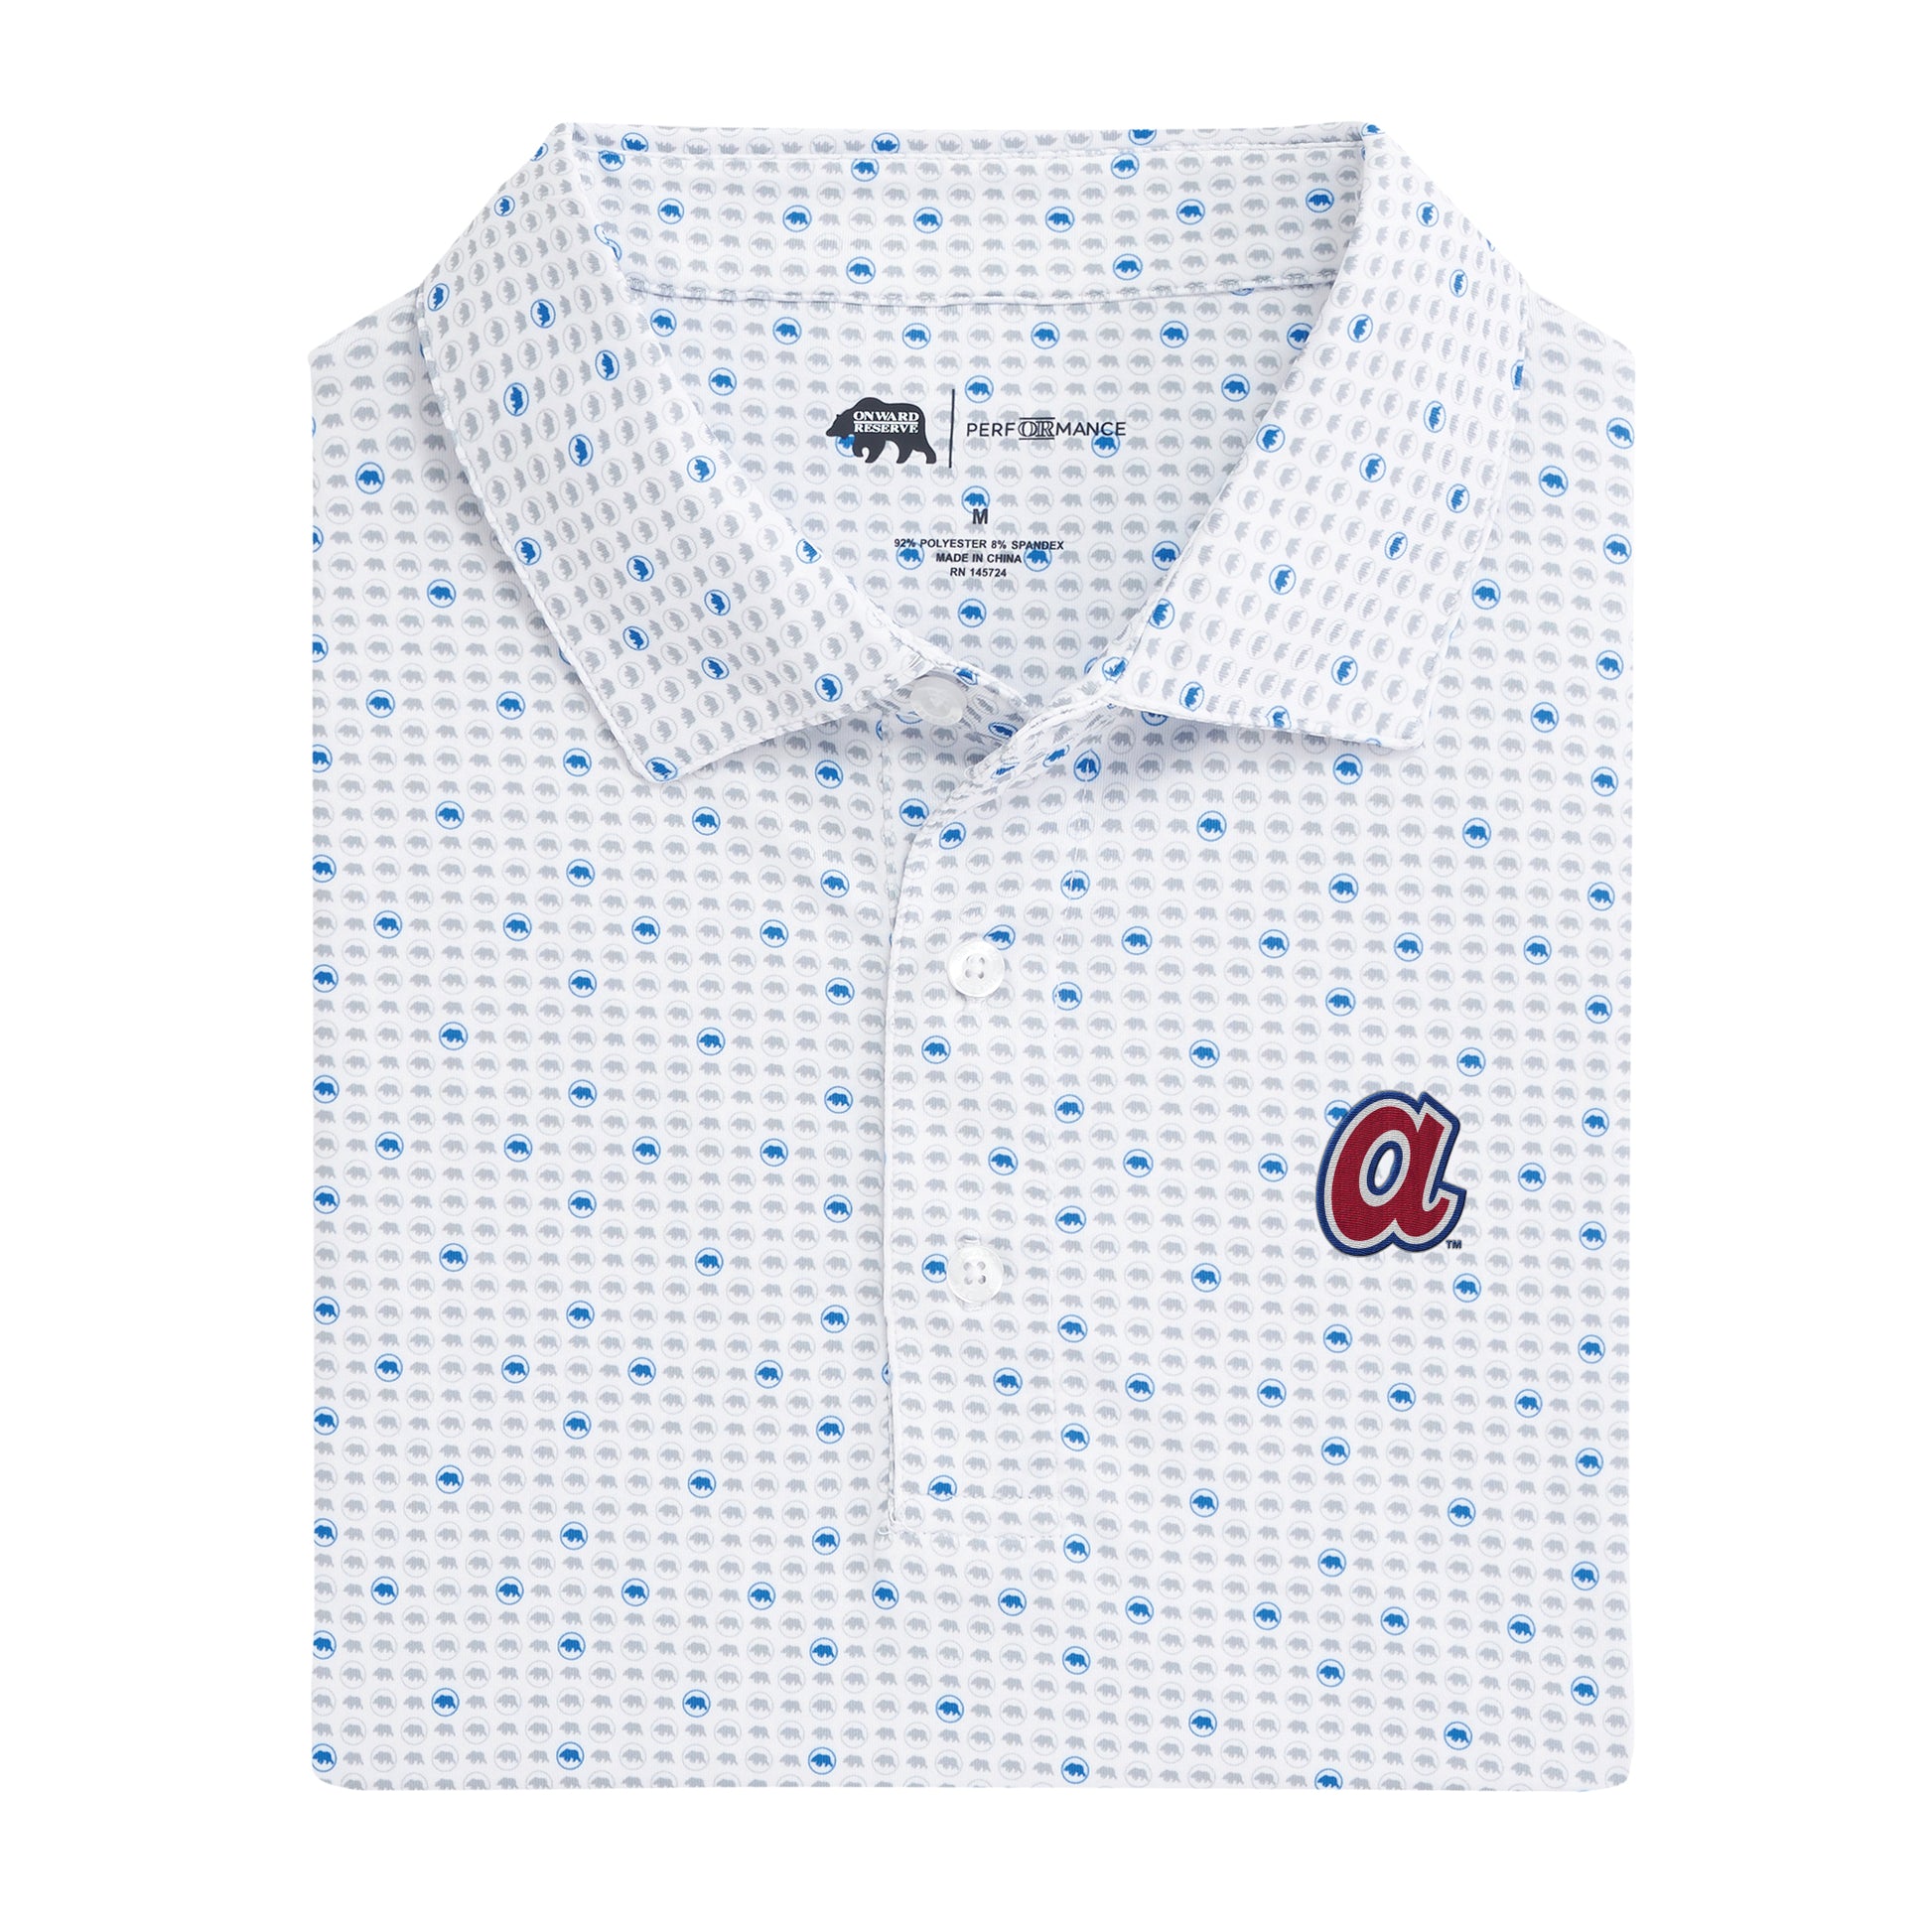 Custom Atlanta Braves Light Blue Throwback Jersey on sale,for  Cheap,wholesale from China